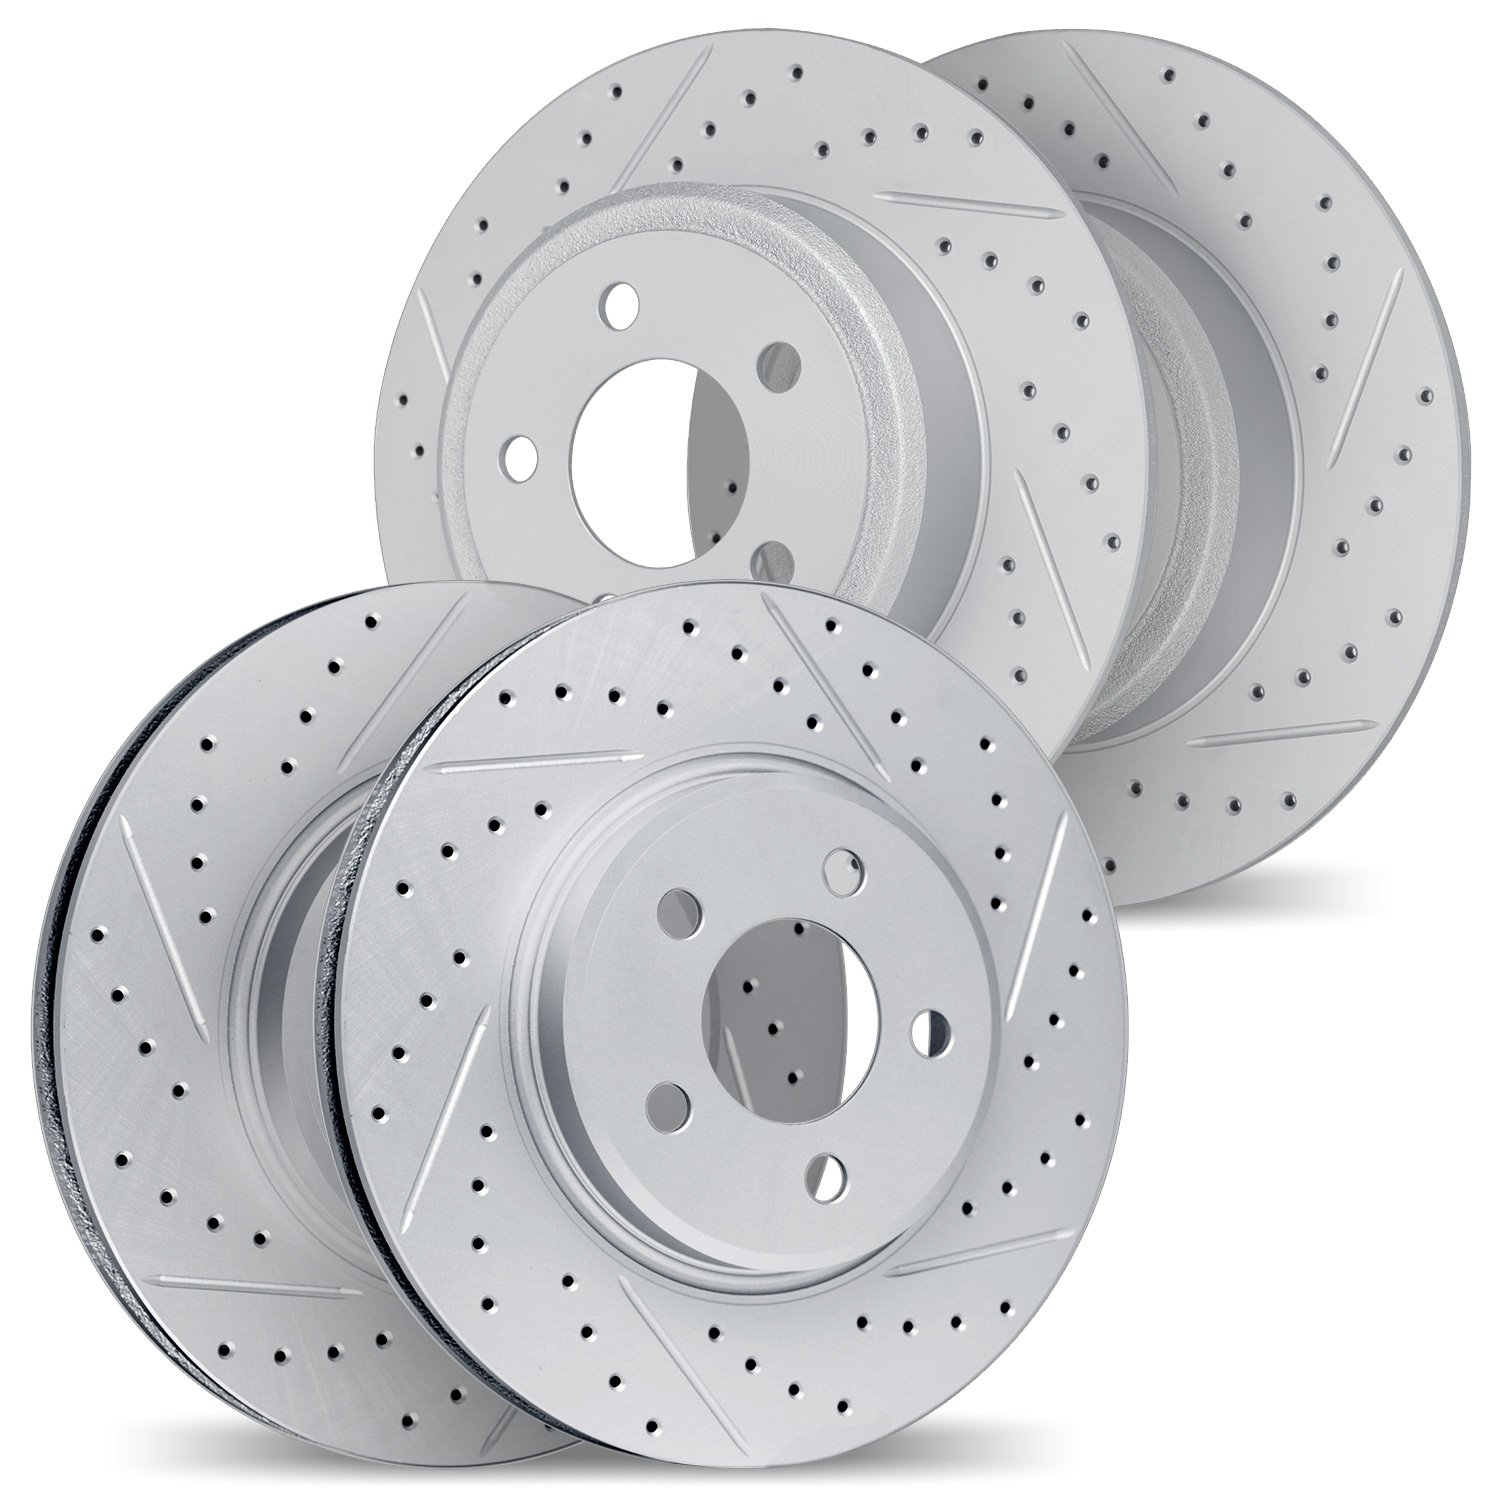 2004-03055 Geoperformance Drilled/Slotted Brake Rotors, 2019-2021 Kia/Hyundai/Genesis, Position: Front and Rear